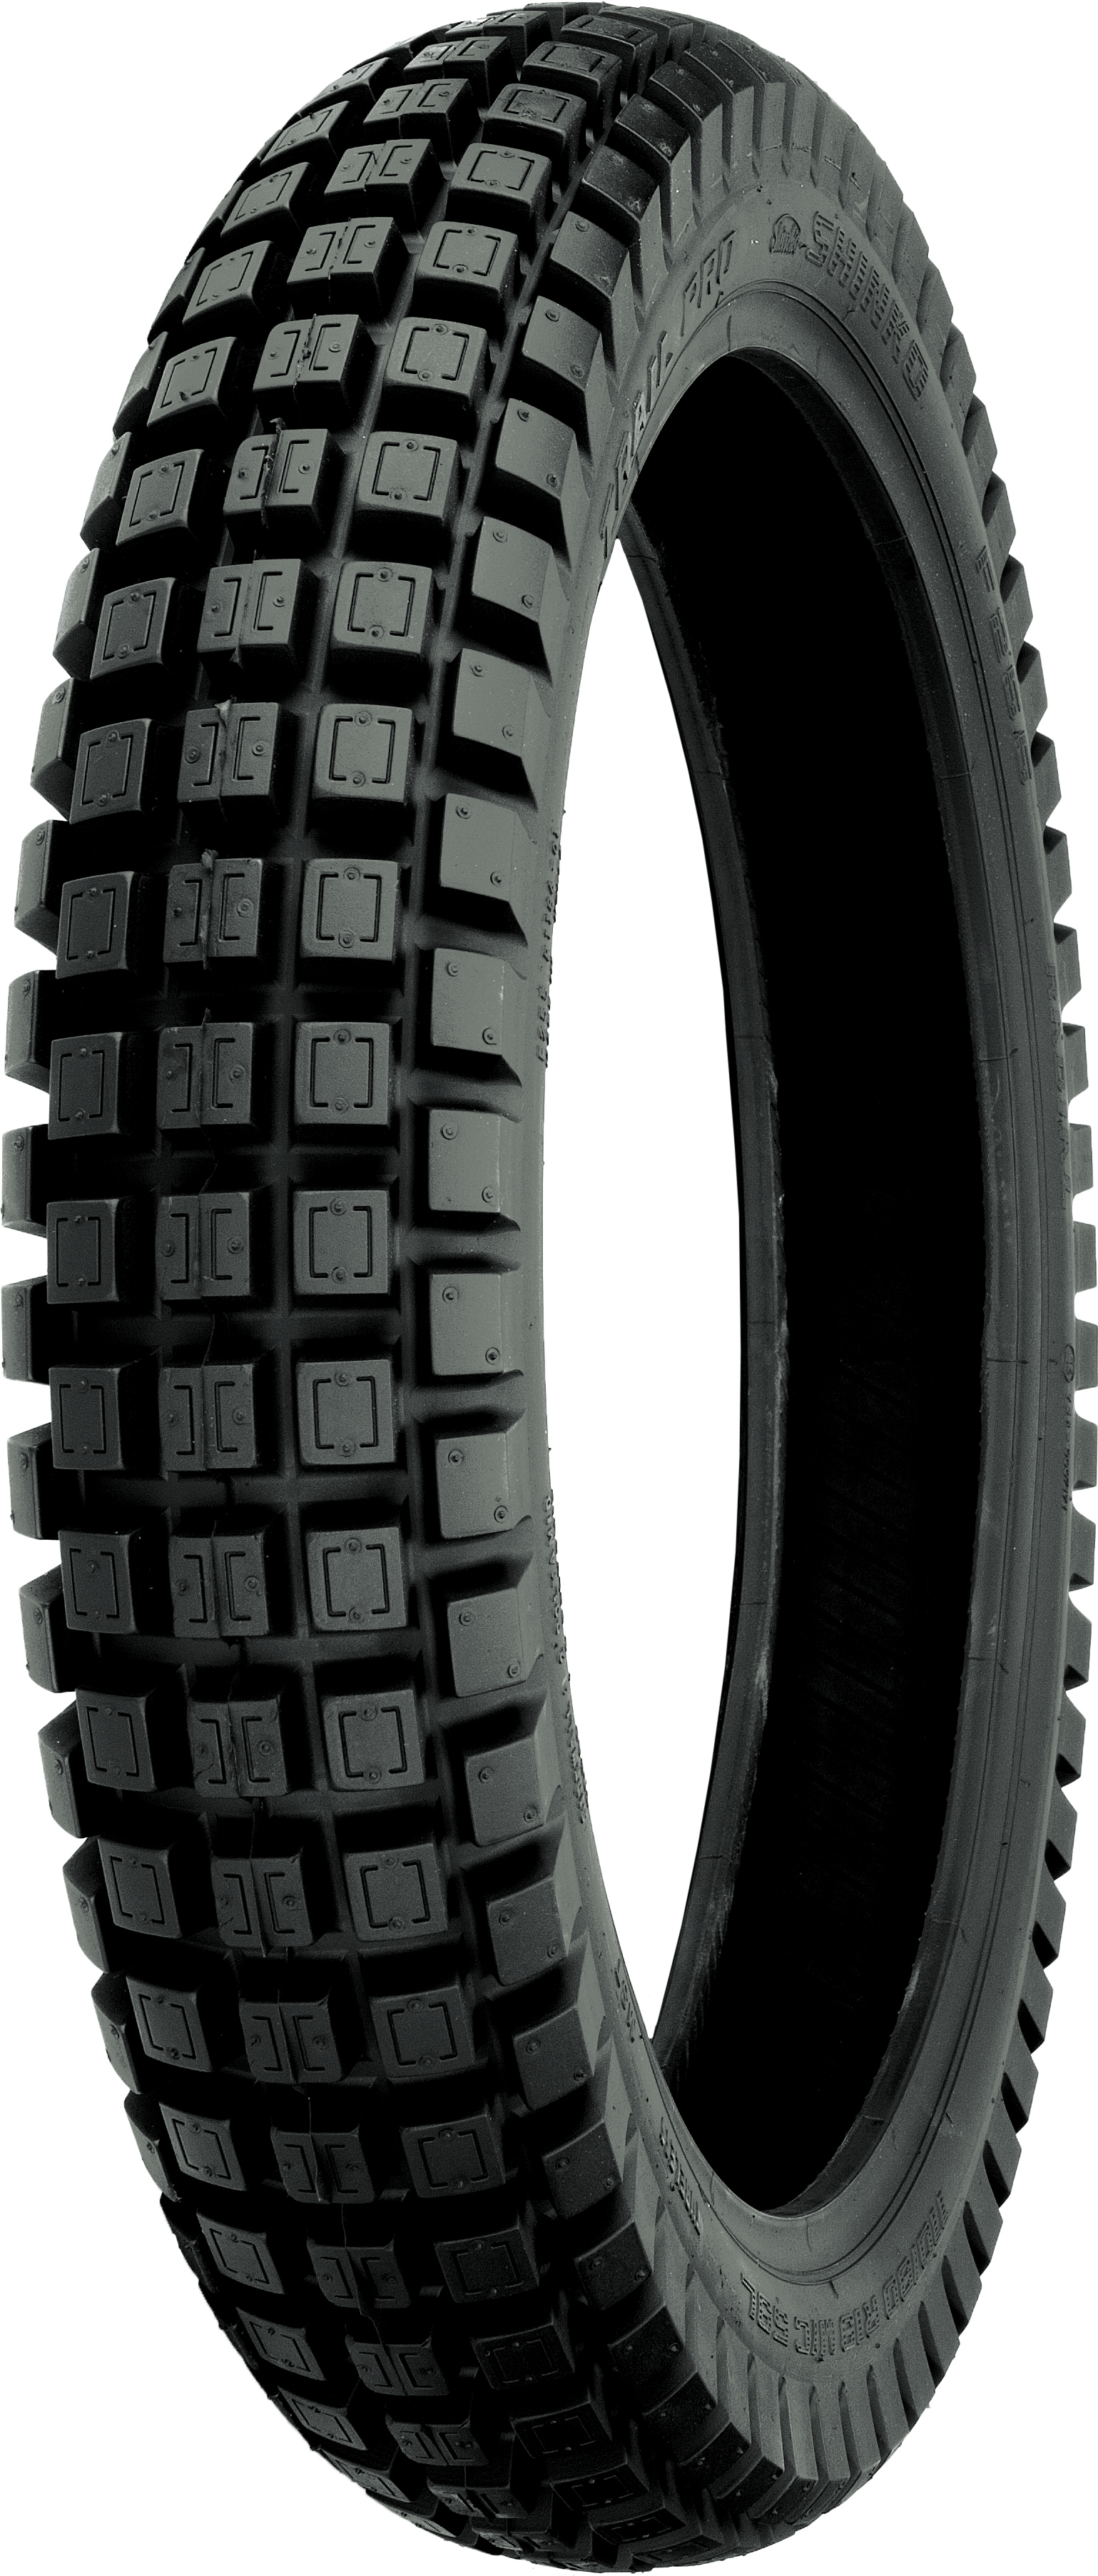 Trail Pro 255 Rear Tire 120/80R19 63M Radial - Click Image to Close